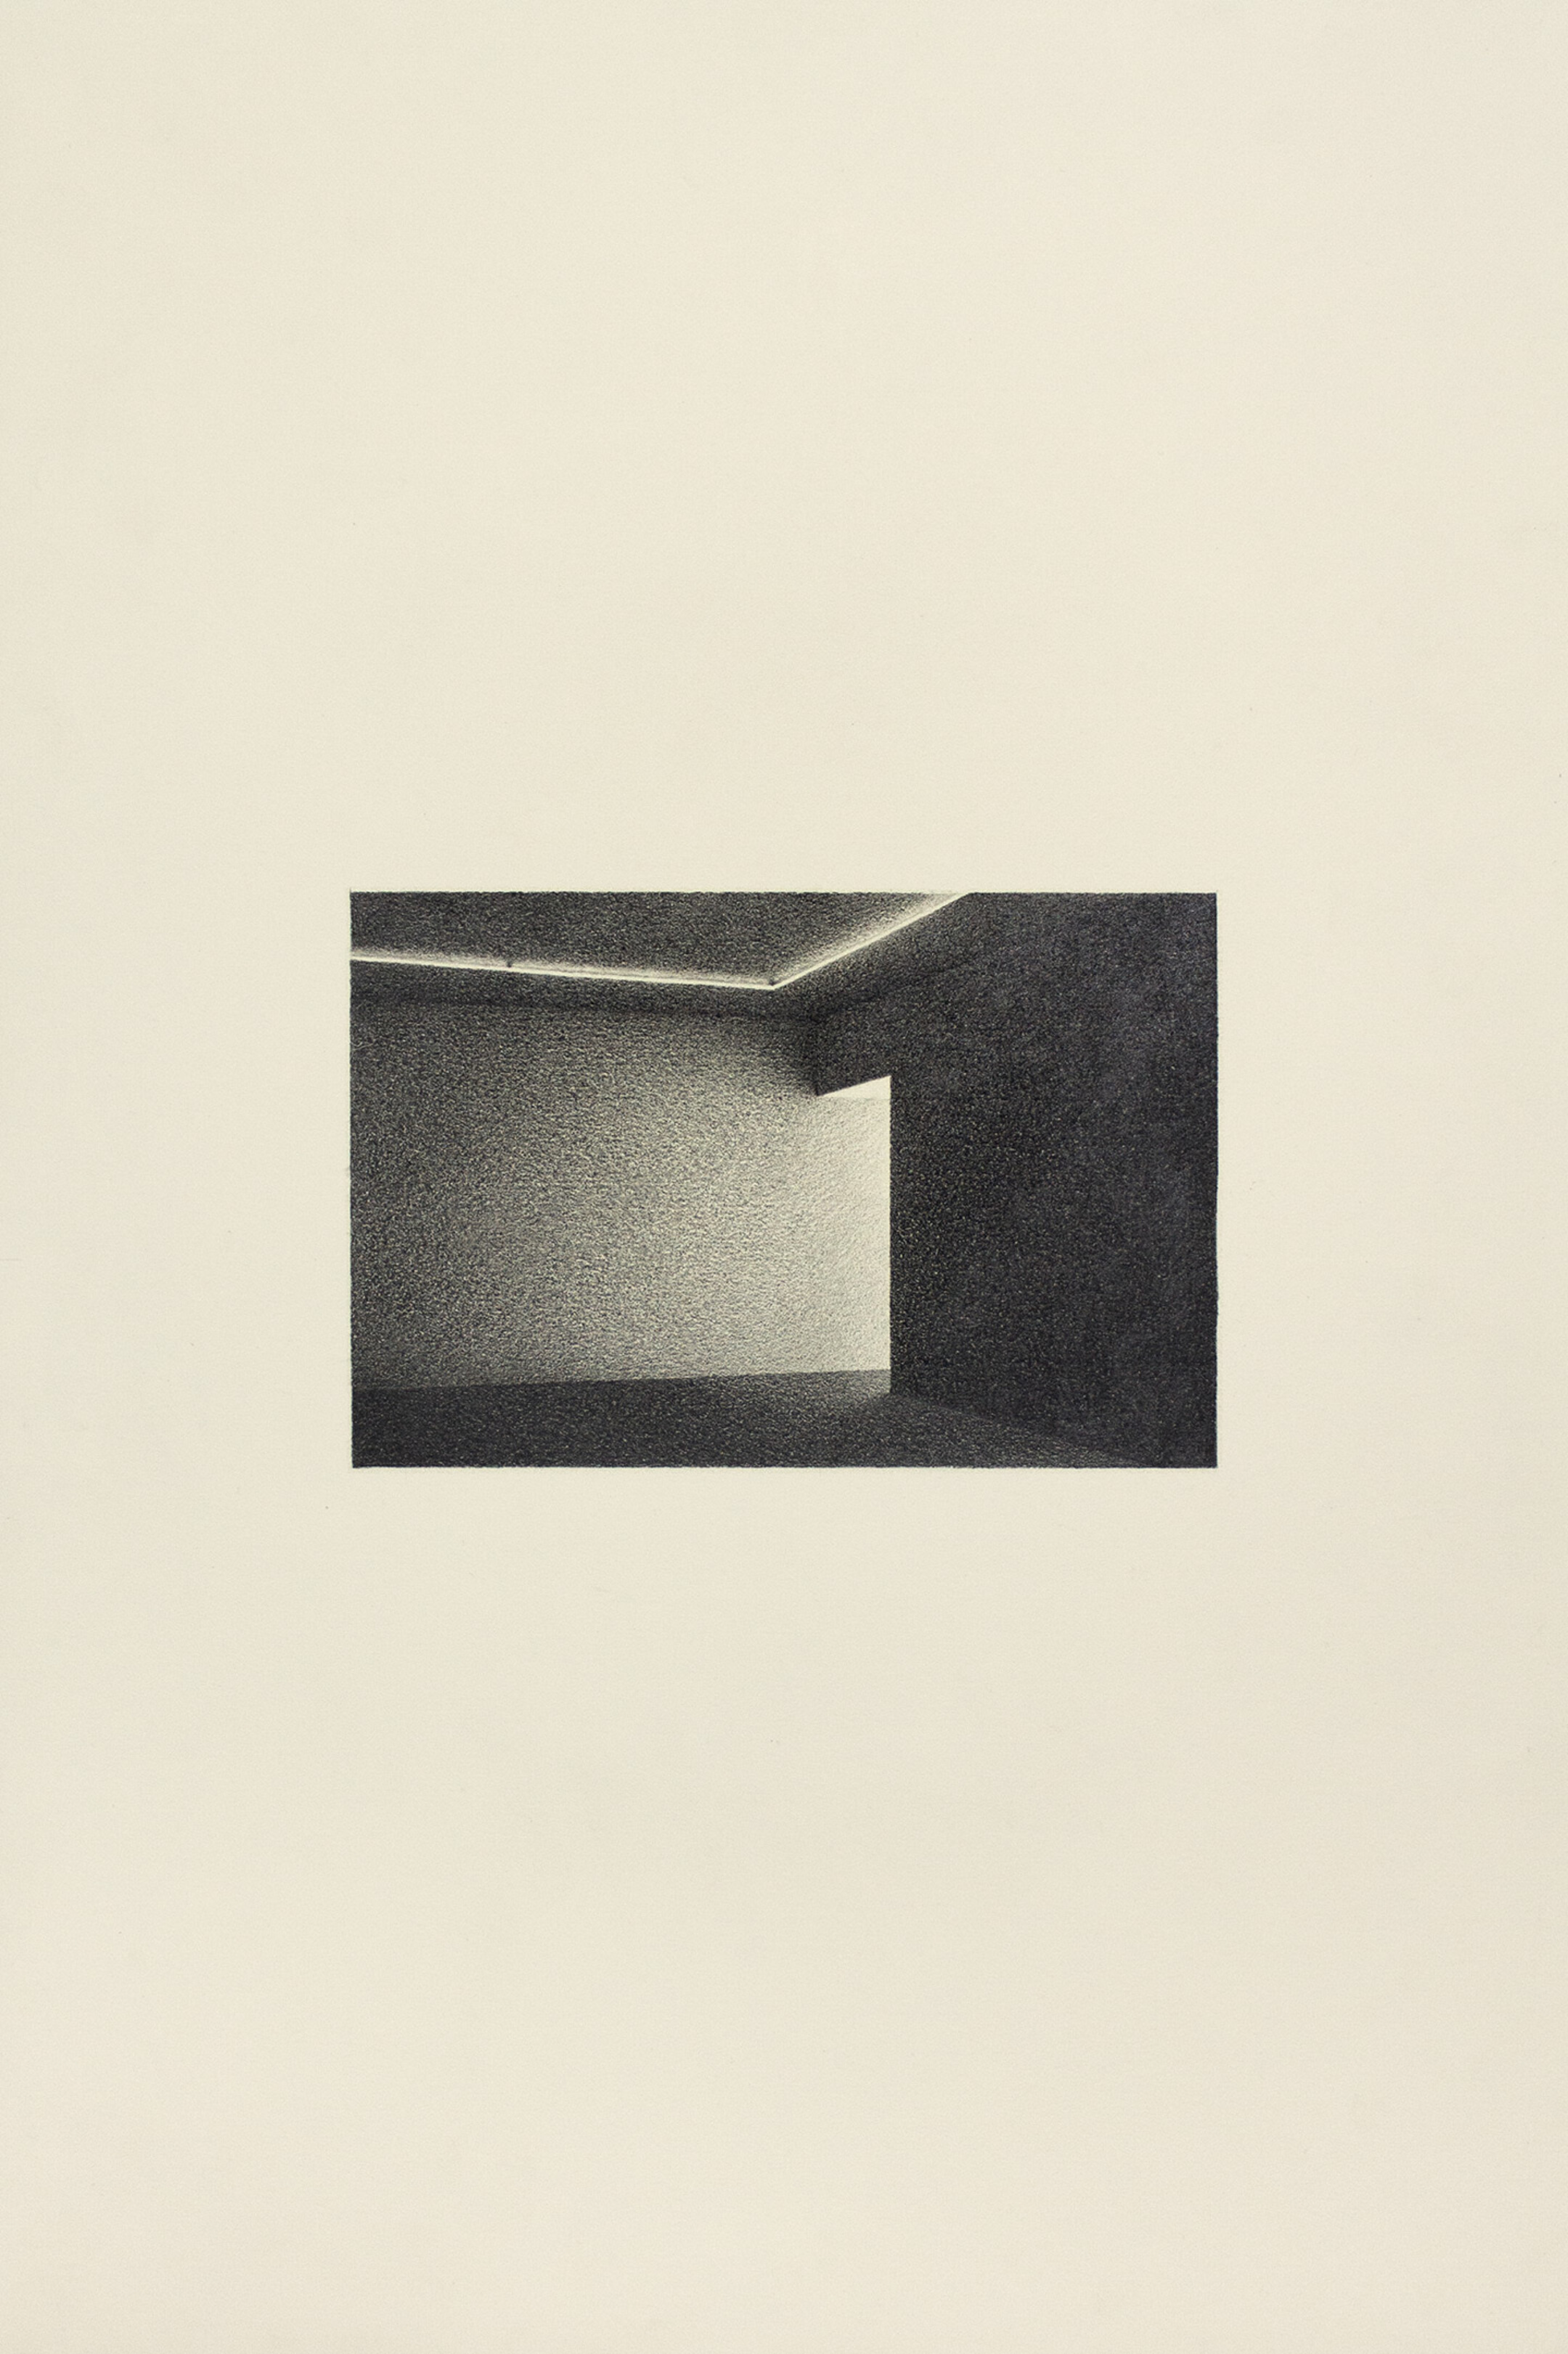 Drawing of an imaginary interior space in pencil on paper